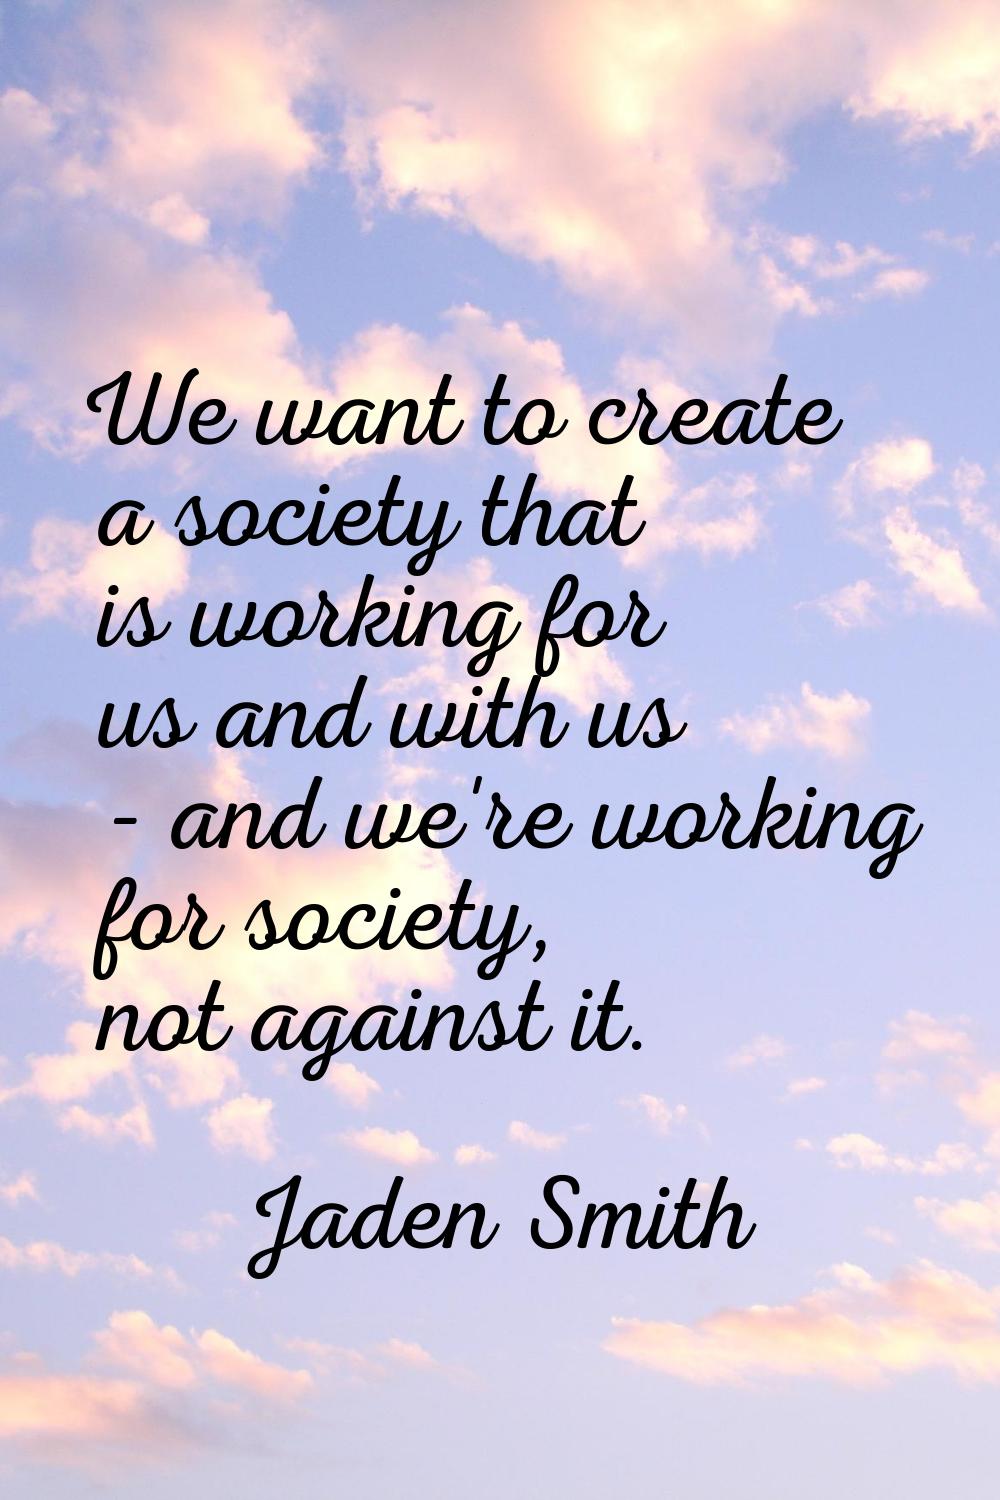 We want to create a society that is working for us and with us - and we're working for society, not